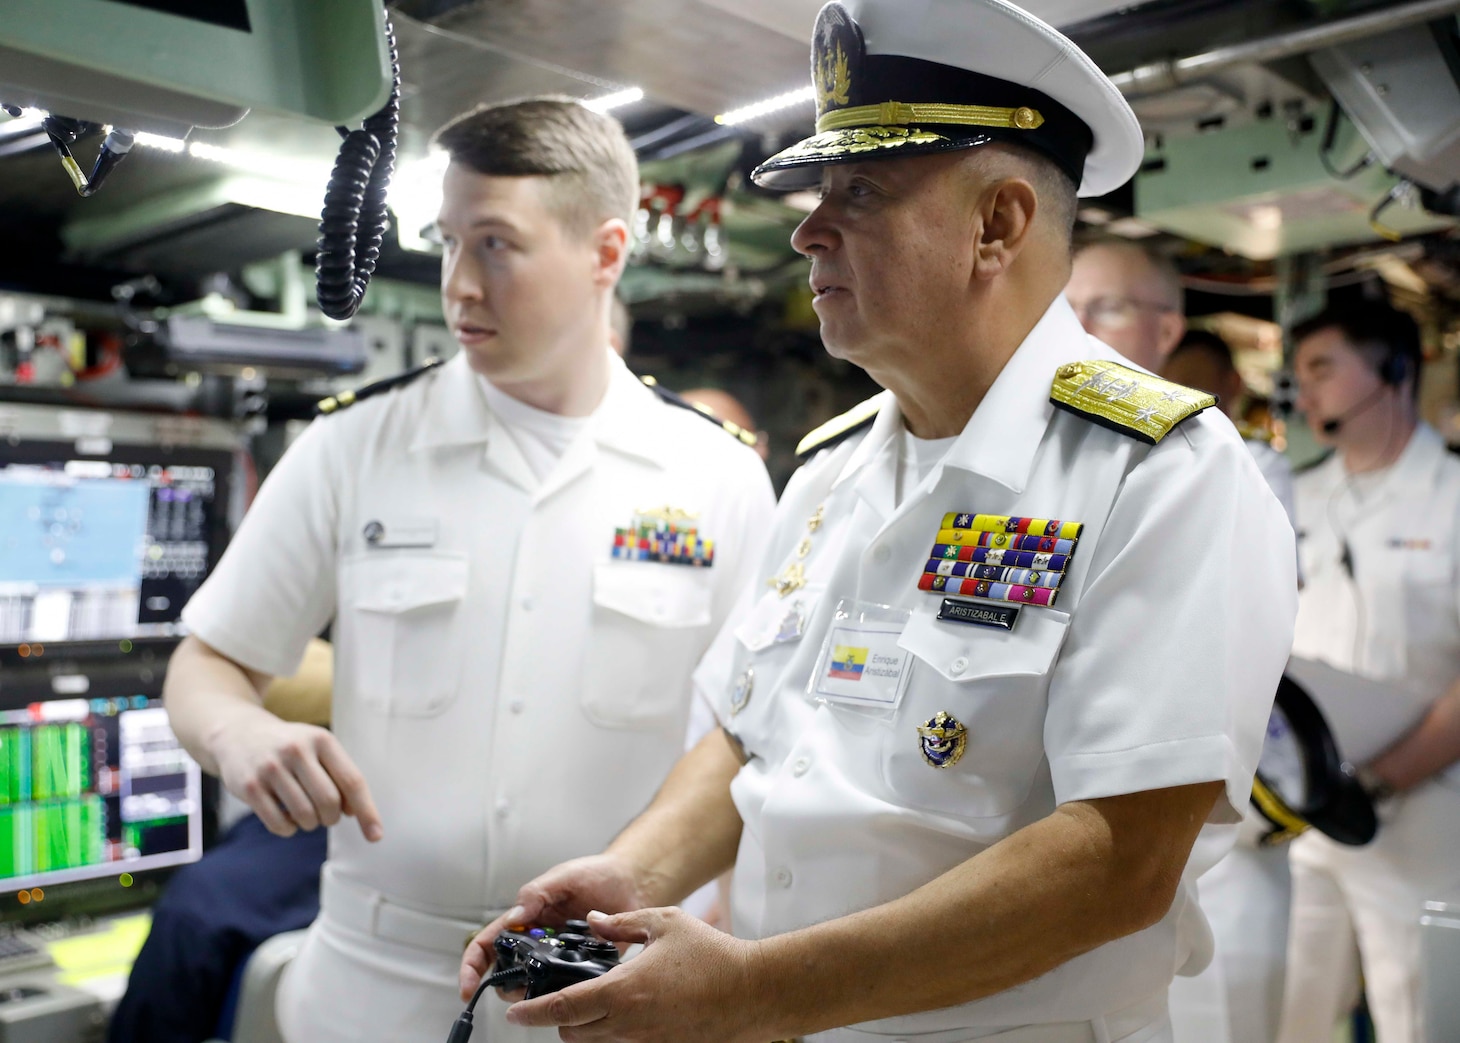 Rear Adm. Enrique Aristizábal, commander of naval operations, Ecuadorian navy, uses a controller device to operate a periscope in the control room during a tour aboard the Virginia-class fast-attack submarine USS Delaware (SSN 791) during the third annual Submarine Conference of the Americas (SCOTA) at Fort Lauderdale, Florida, April 3, 2024.